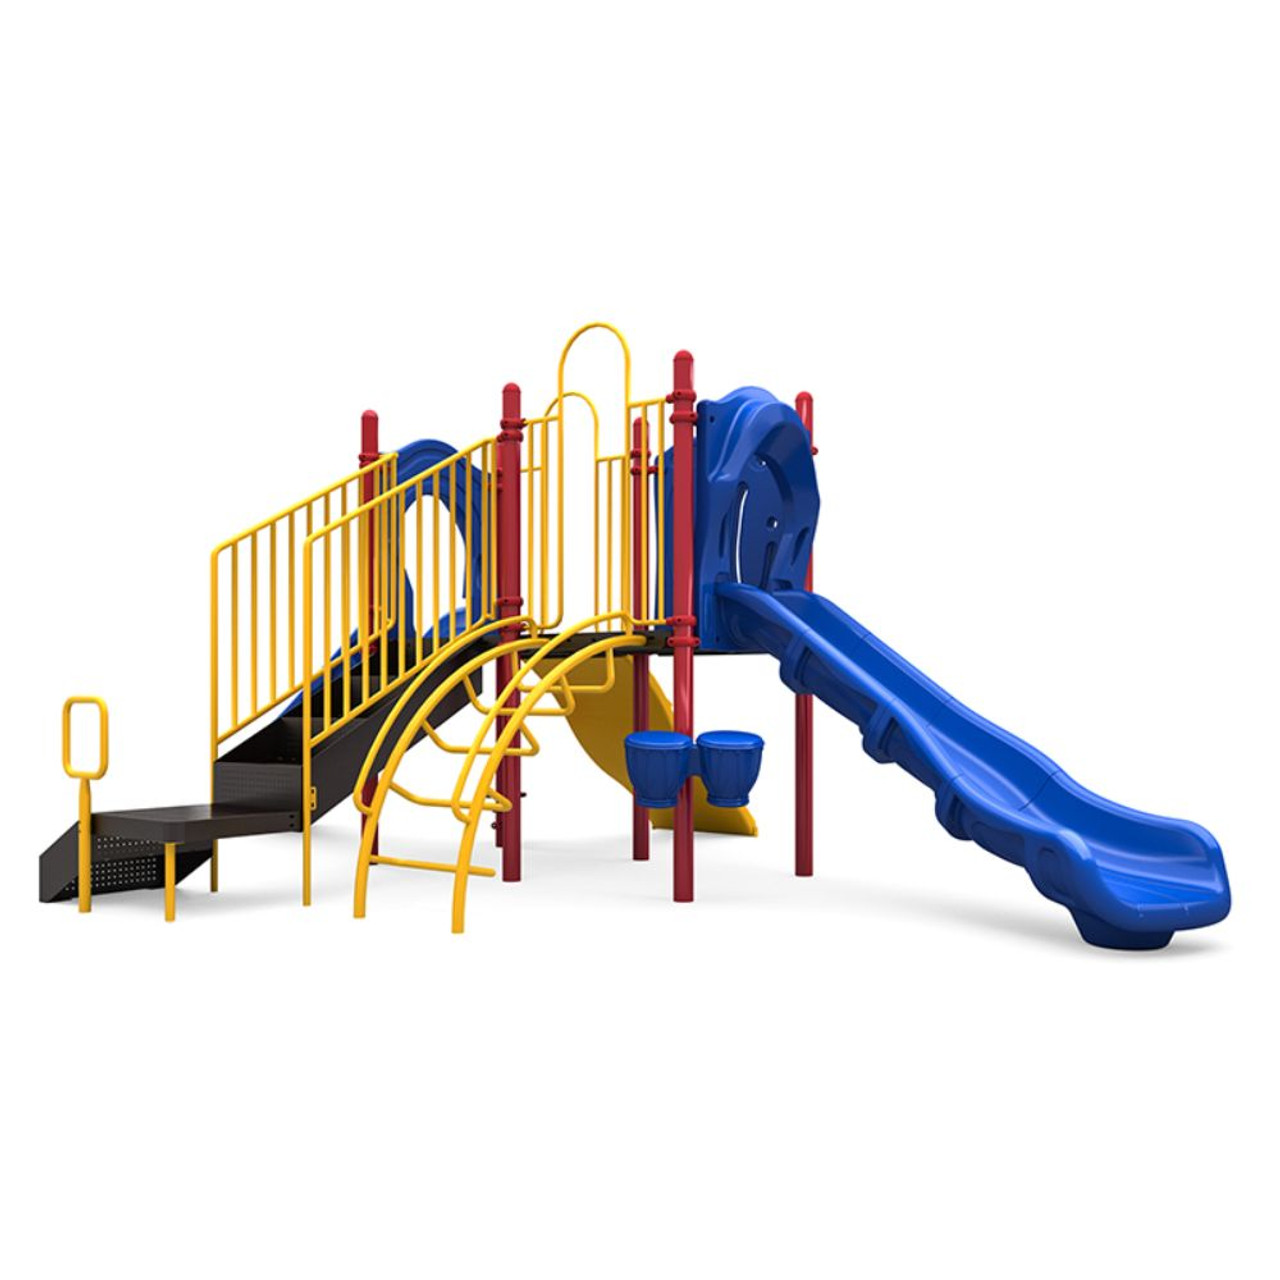 Northern Place Playset - primary - no roof